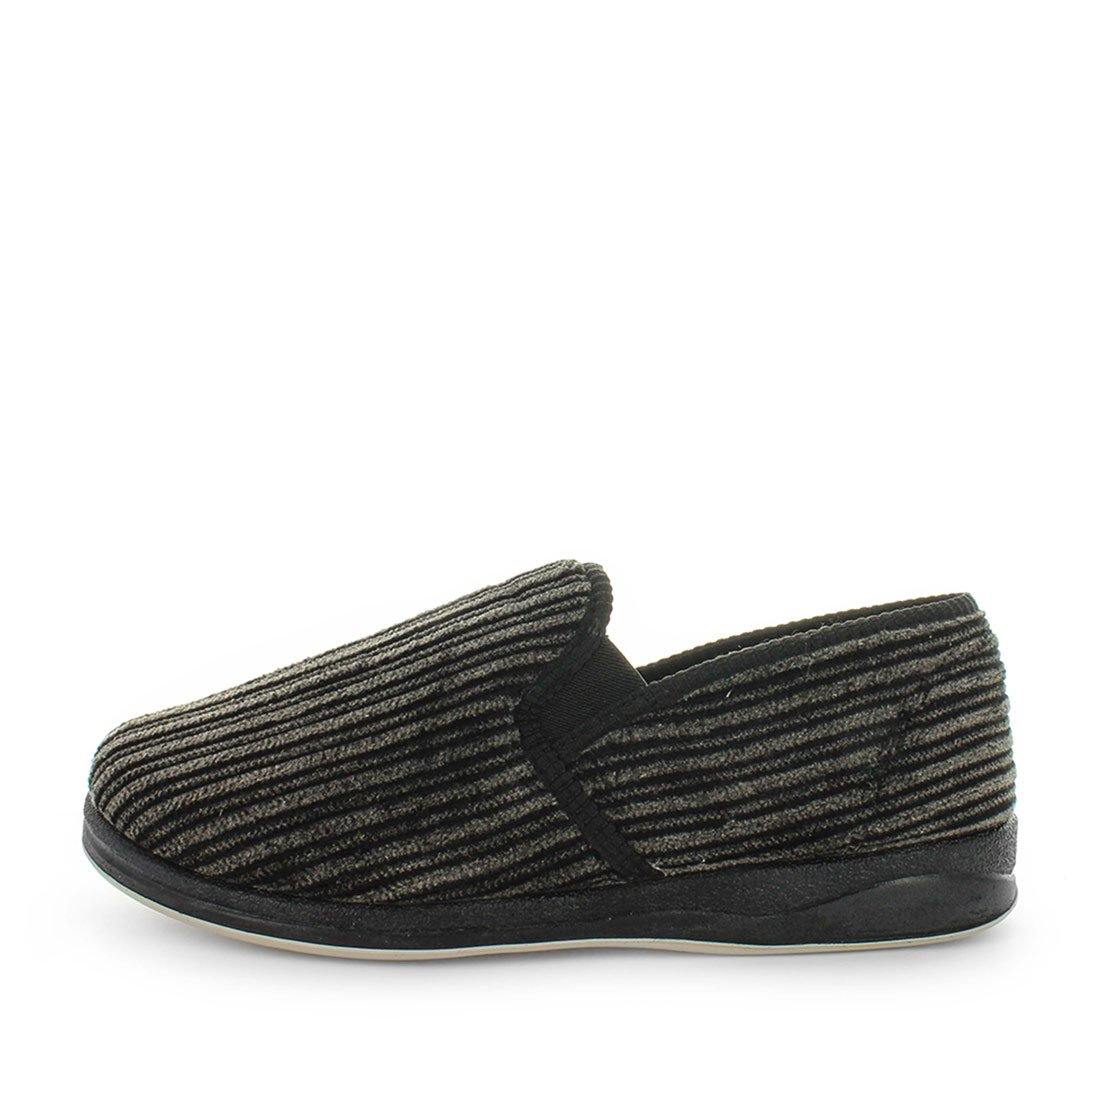 The best classic mens slipper, Eden by panda slippers. A black slip on style slipper with soft materials and comfy fit design for indoor wear. - panda slippers - mens comfort slippers - padded foot